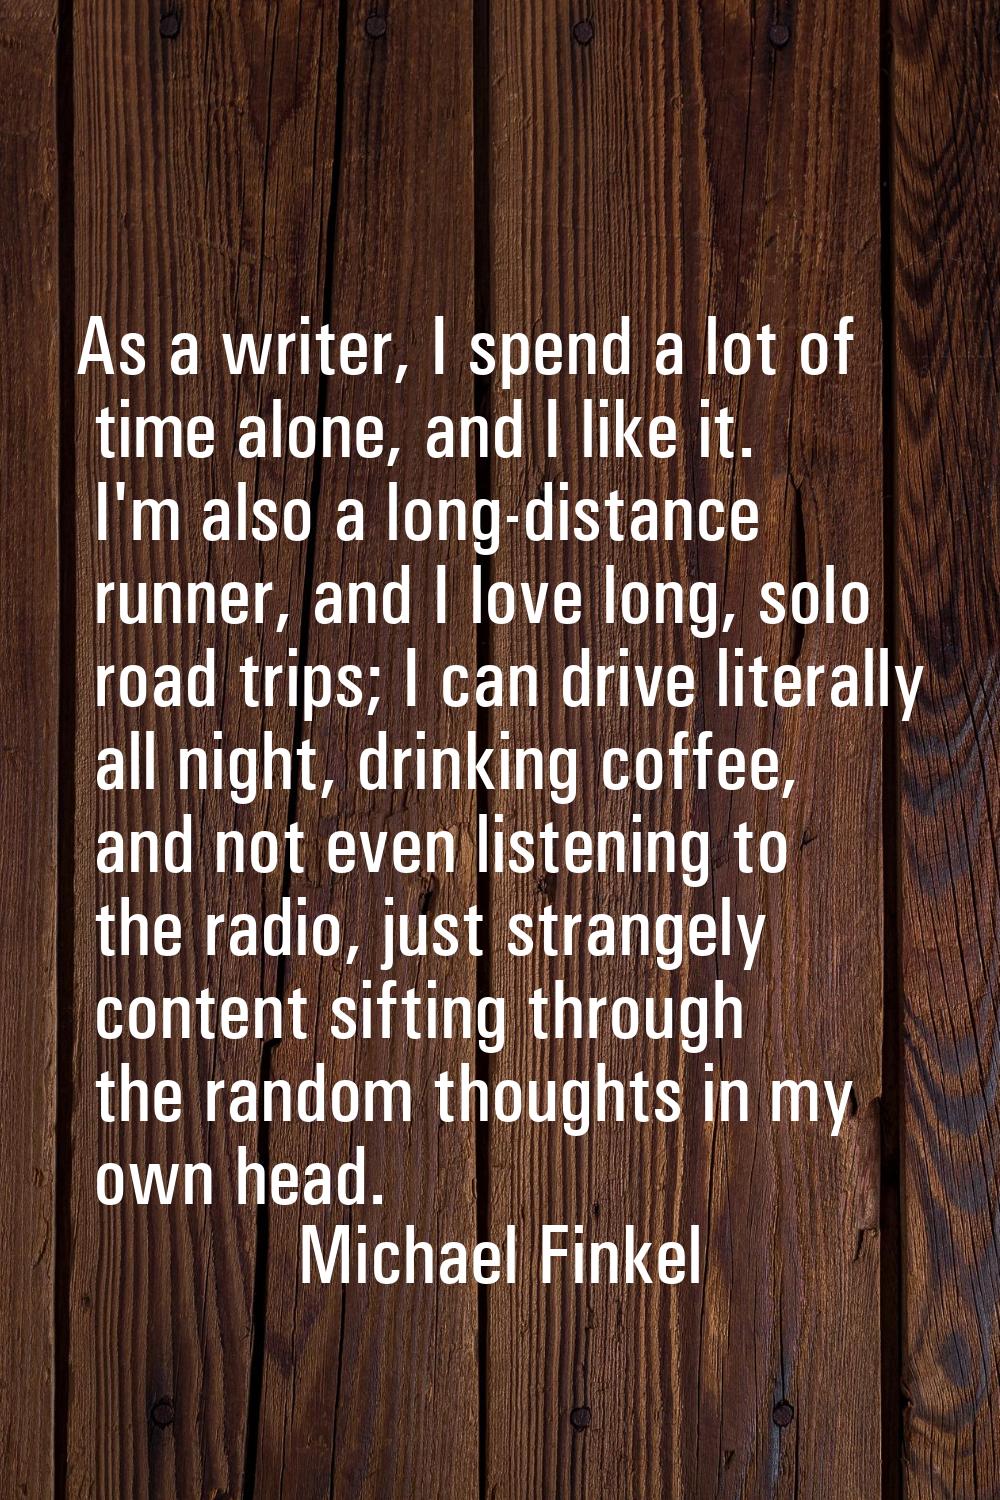 As a writer, I spend a lot of time alone, and I like it. I'm also a long-distance runner, and I lov